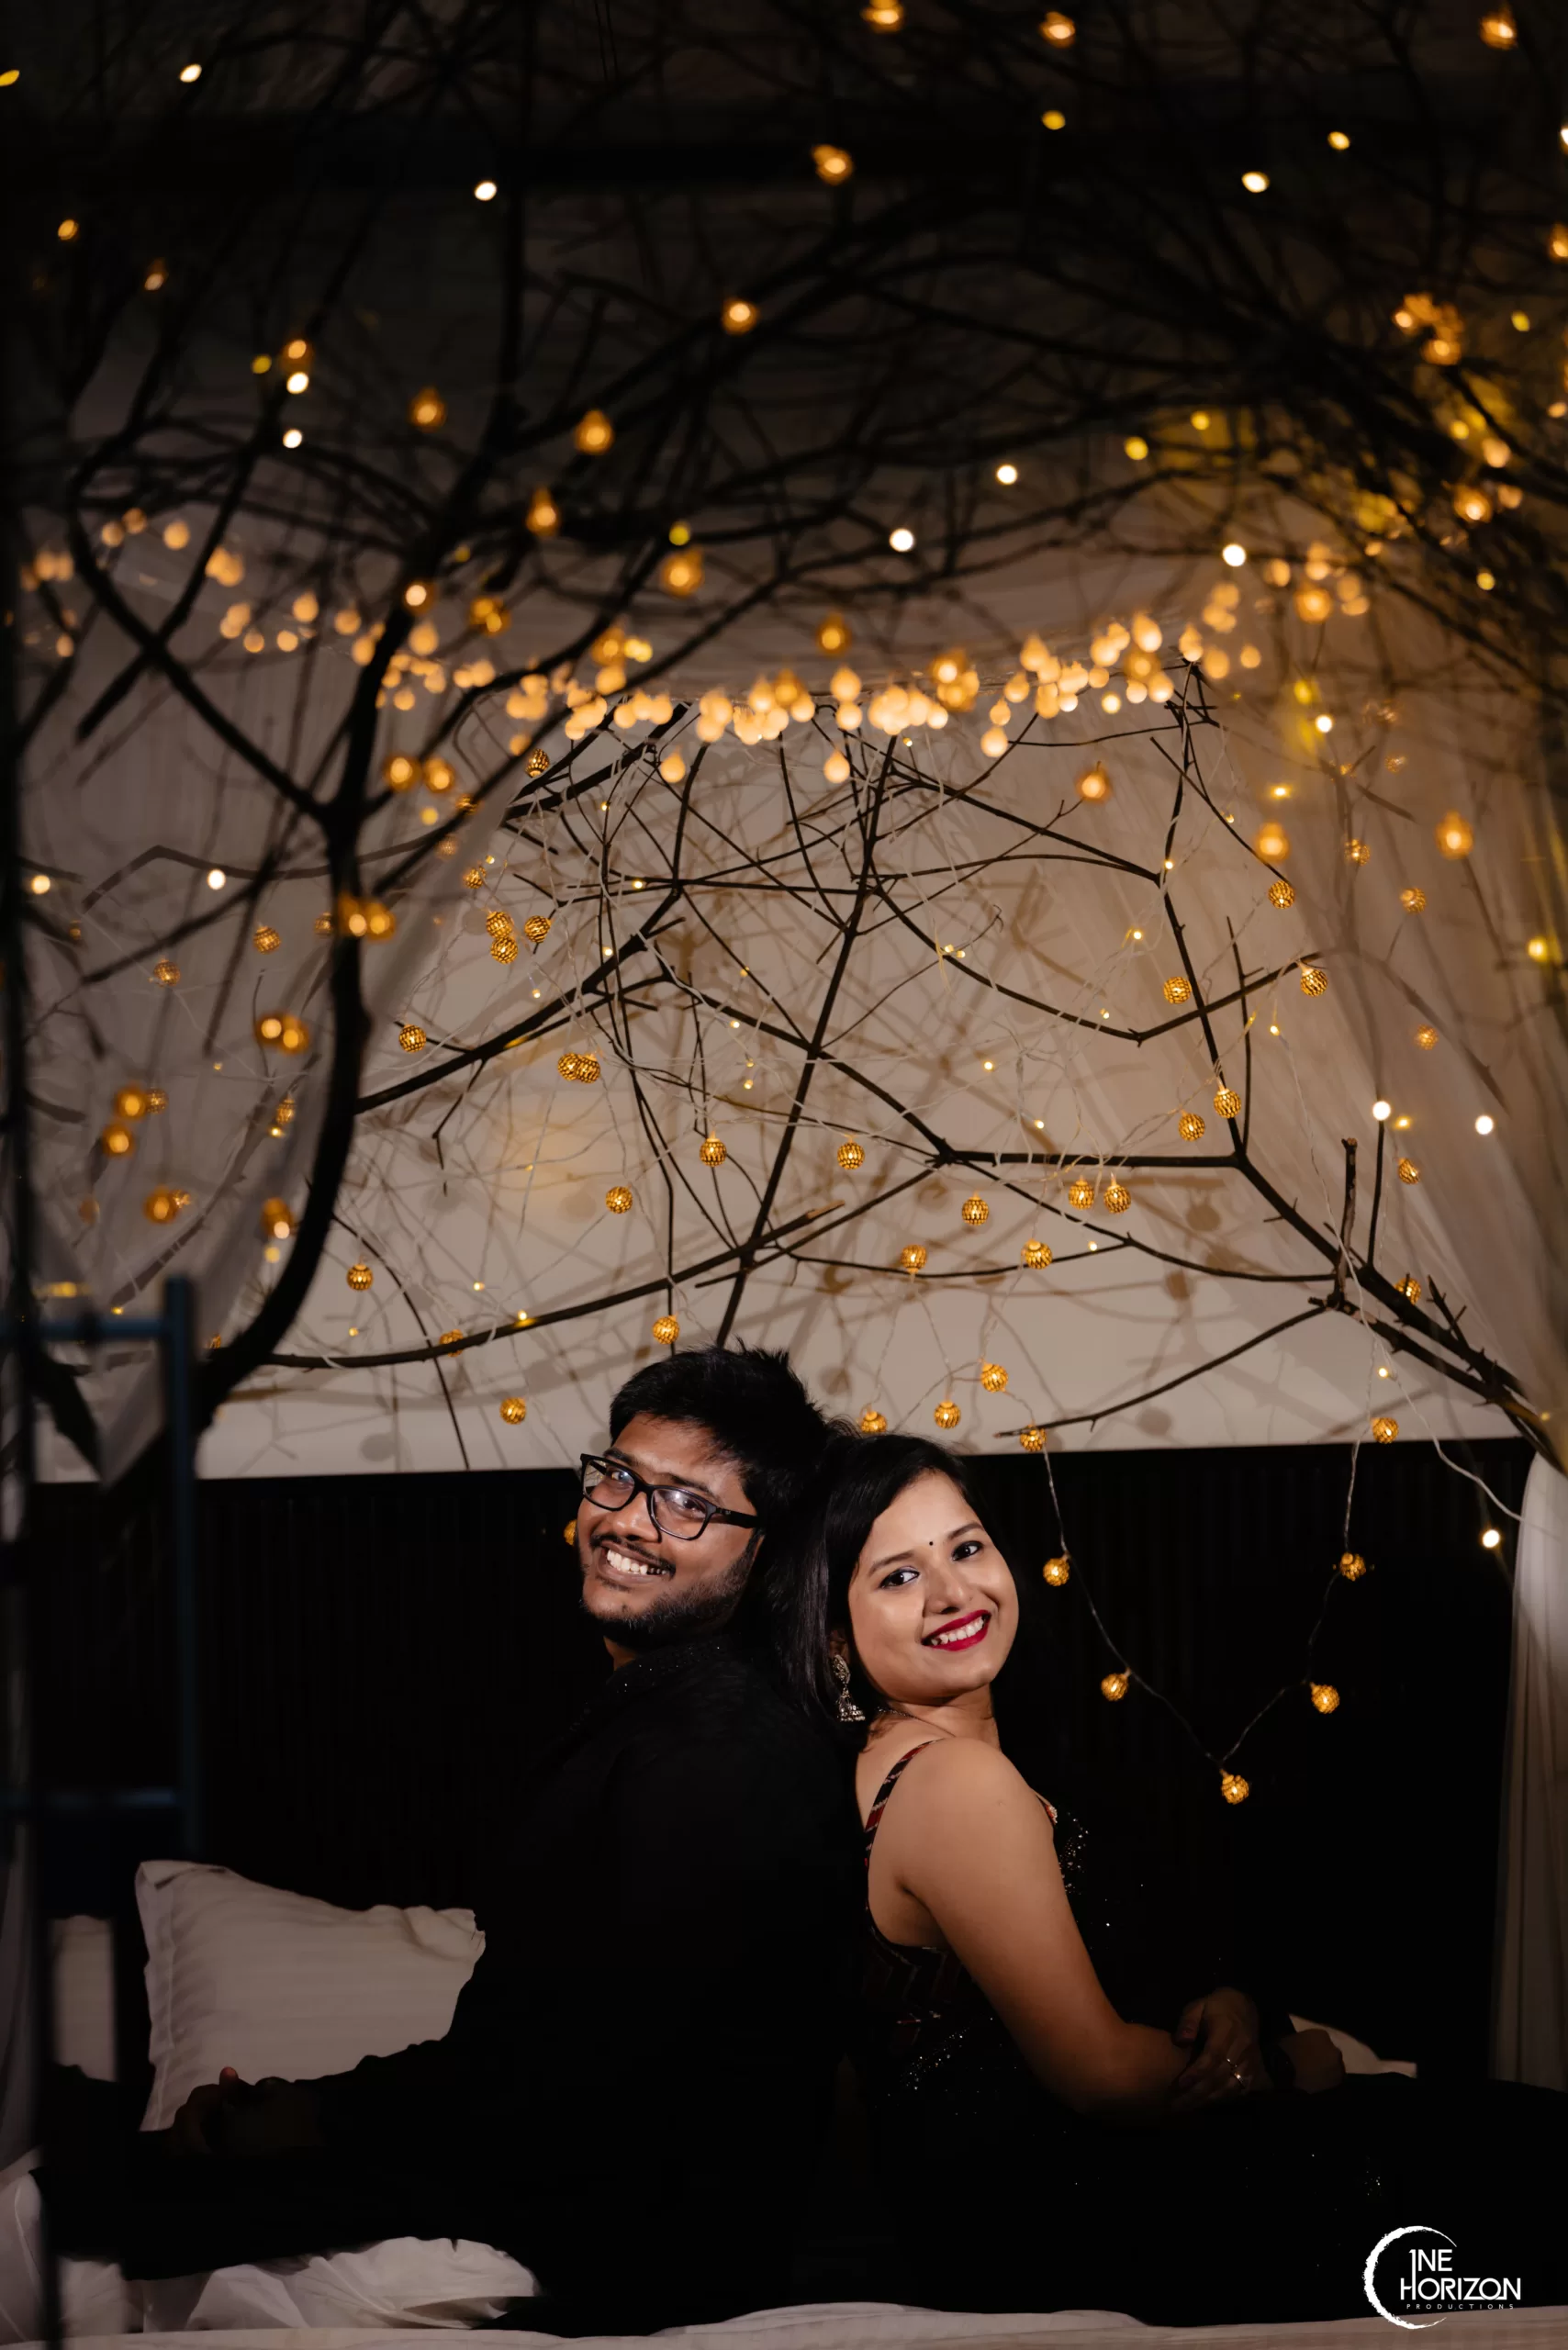 Romantic pre wedding shoot poses that everyone love to try - Simple Craft  Idea-sonthuy.vn